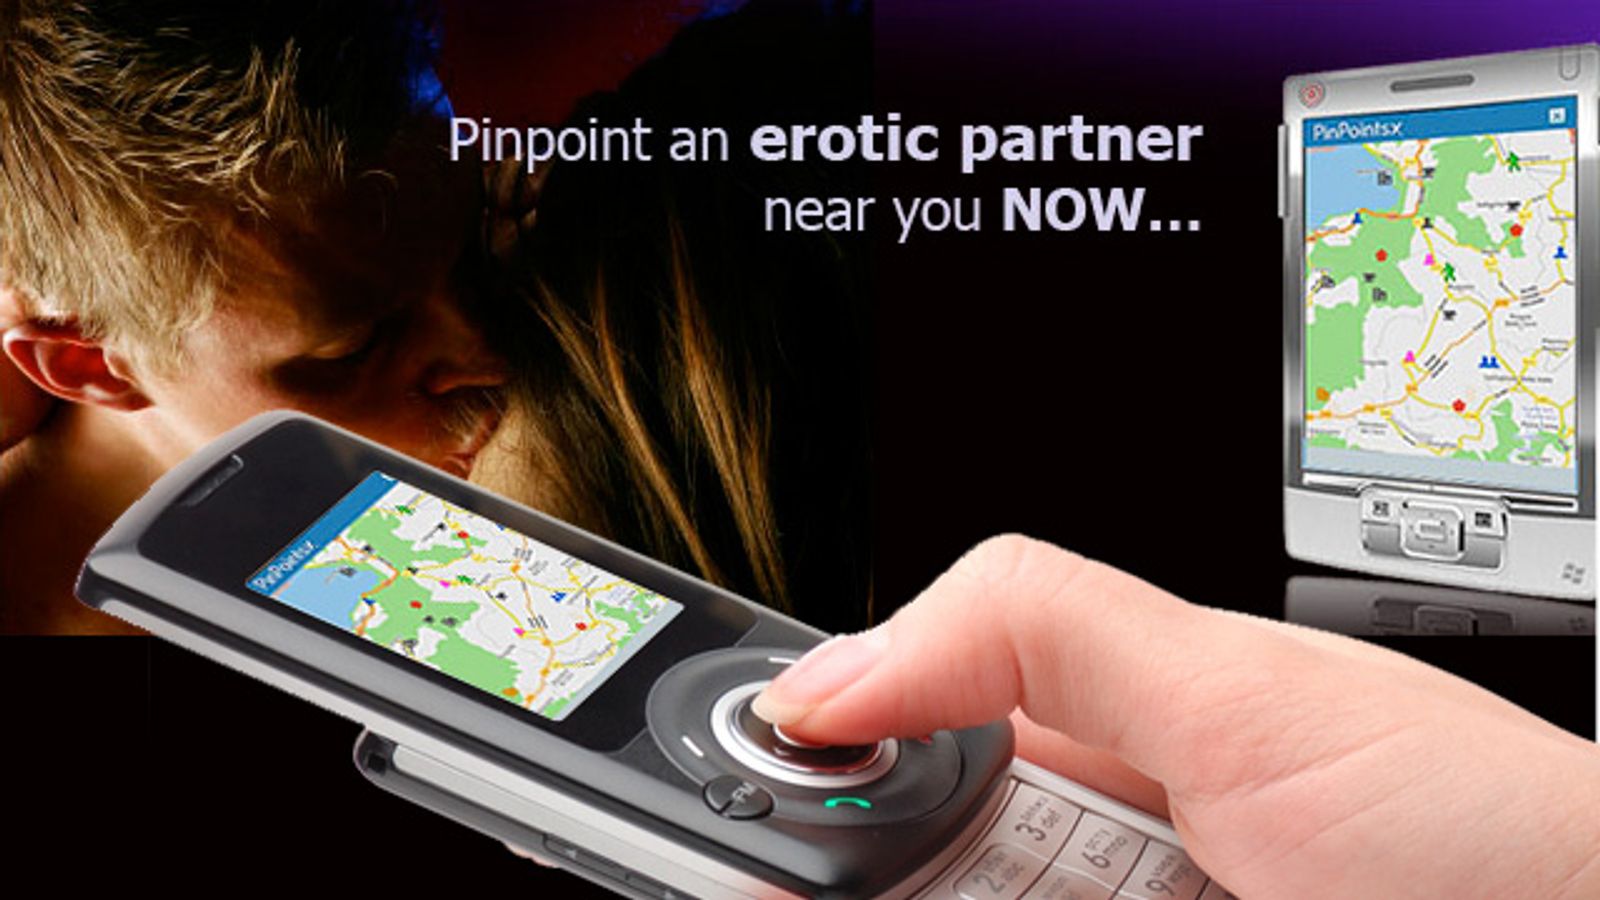 PinPointsX Releases Service for Touch Screen Smart Phones in U.S.